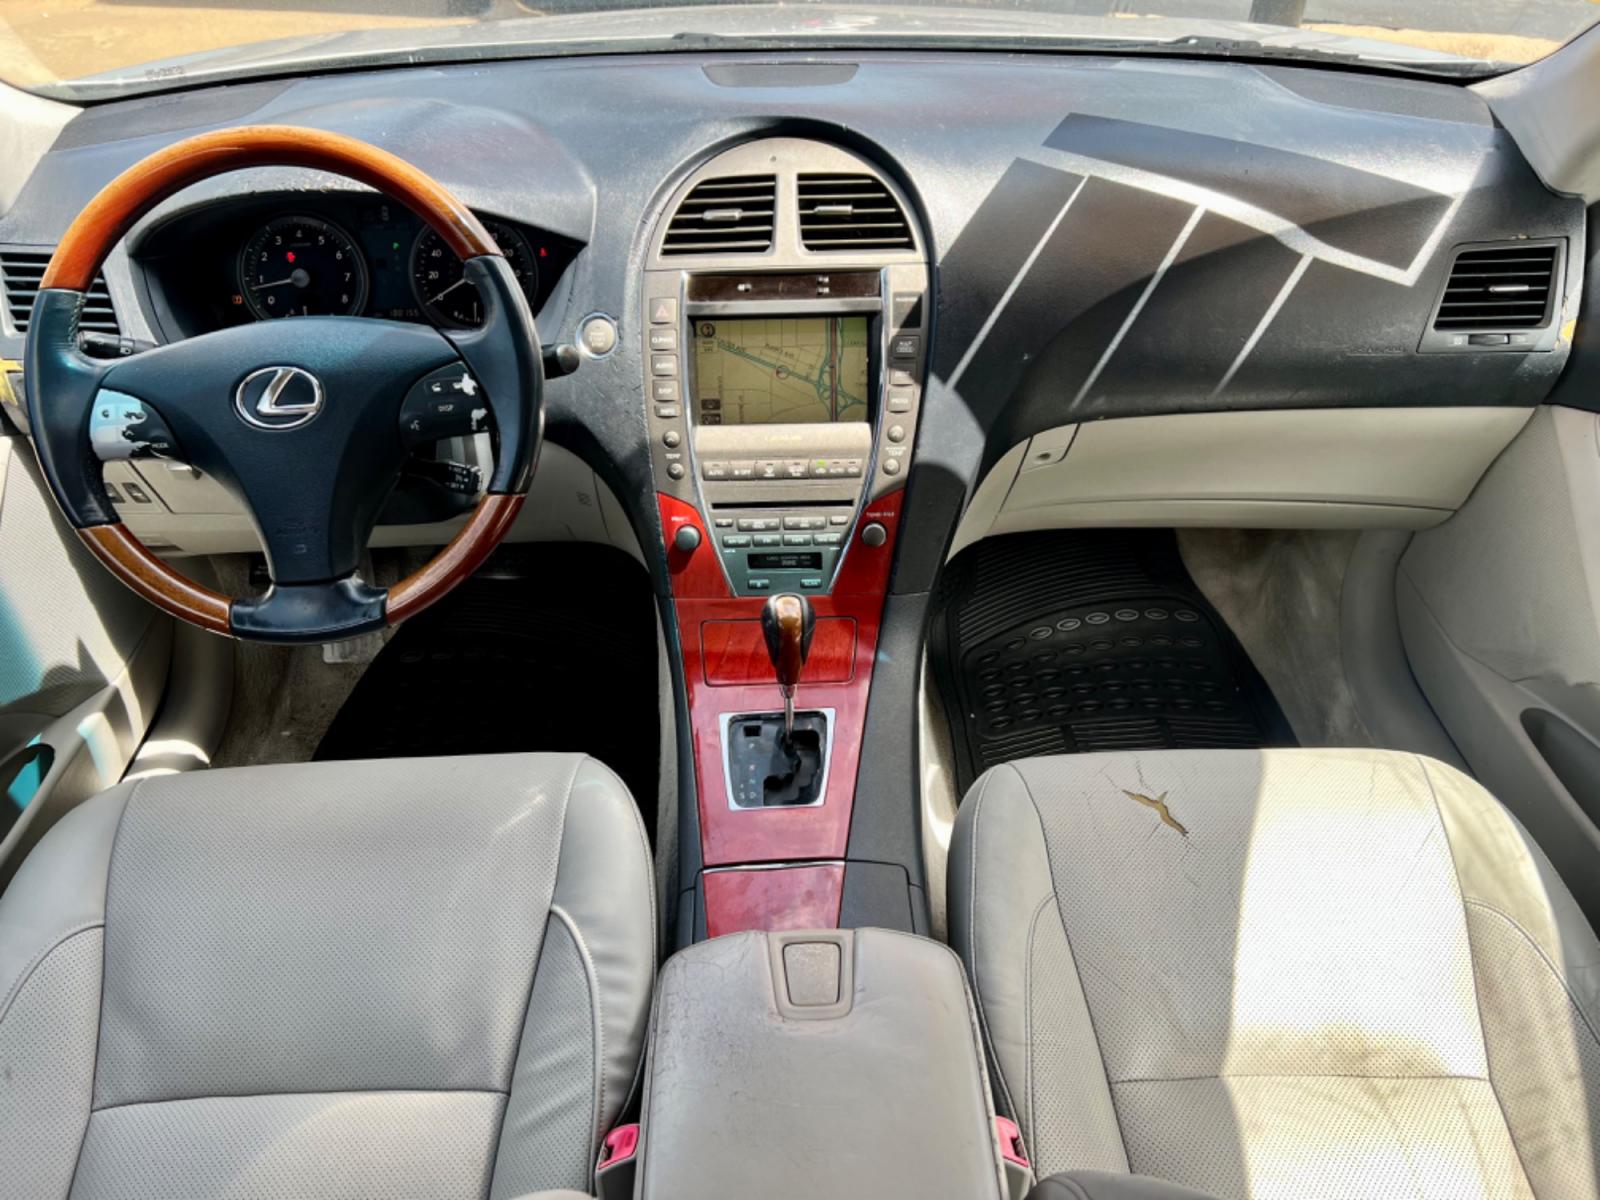 2007 SILVER LEXUS ES 350 BASE (JTHBJ46G072) , located at 5900 E. Lancaster Ave., Fort Worth, TX, 76112, (817) 457-5456, 0.000000, 0.000000 - CASH CAR ONLY, NO FINANCING AVAILABLE. WE'VE SLASHED THE PRICE! NOW ONLY $5,391! THIS 2007 LEXUS ES 350 BASE 4 DOOR SEDAN RUNS AND DRIVES GREAT. IT IS EQUIPPED WITH A CD PLAYER, AM/FM RADIO AND AN AUX PORT. THE TIRES ARE IN GOOD CONDITION AND STILL HAVE TREAD LEFT ON THEM. THIS CAR WILL NOT LAST S - Photo #17